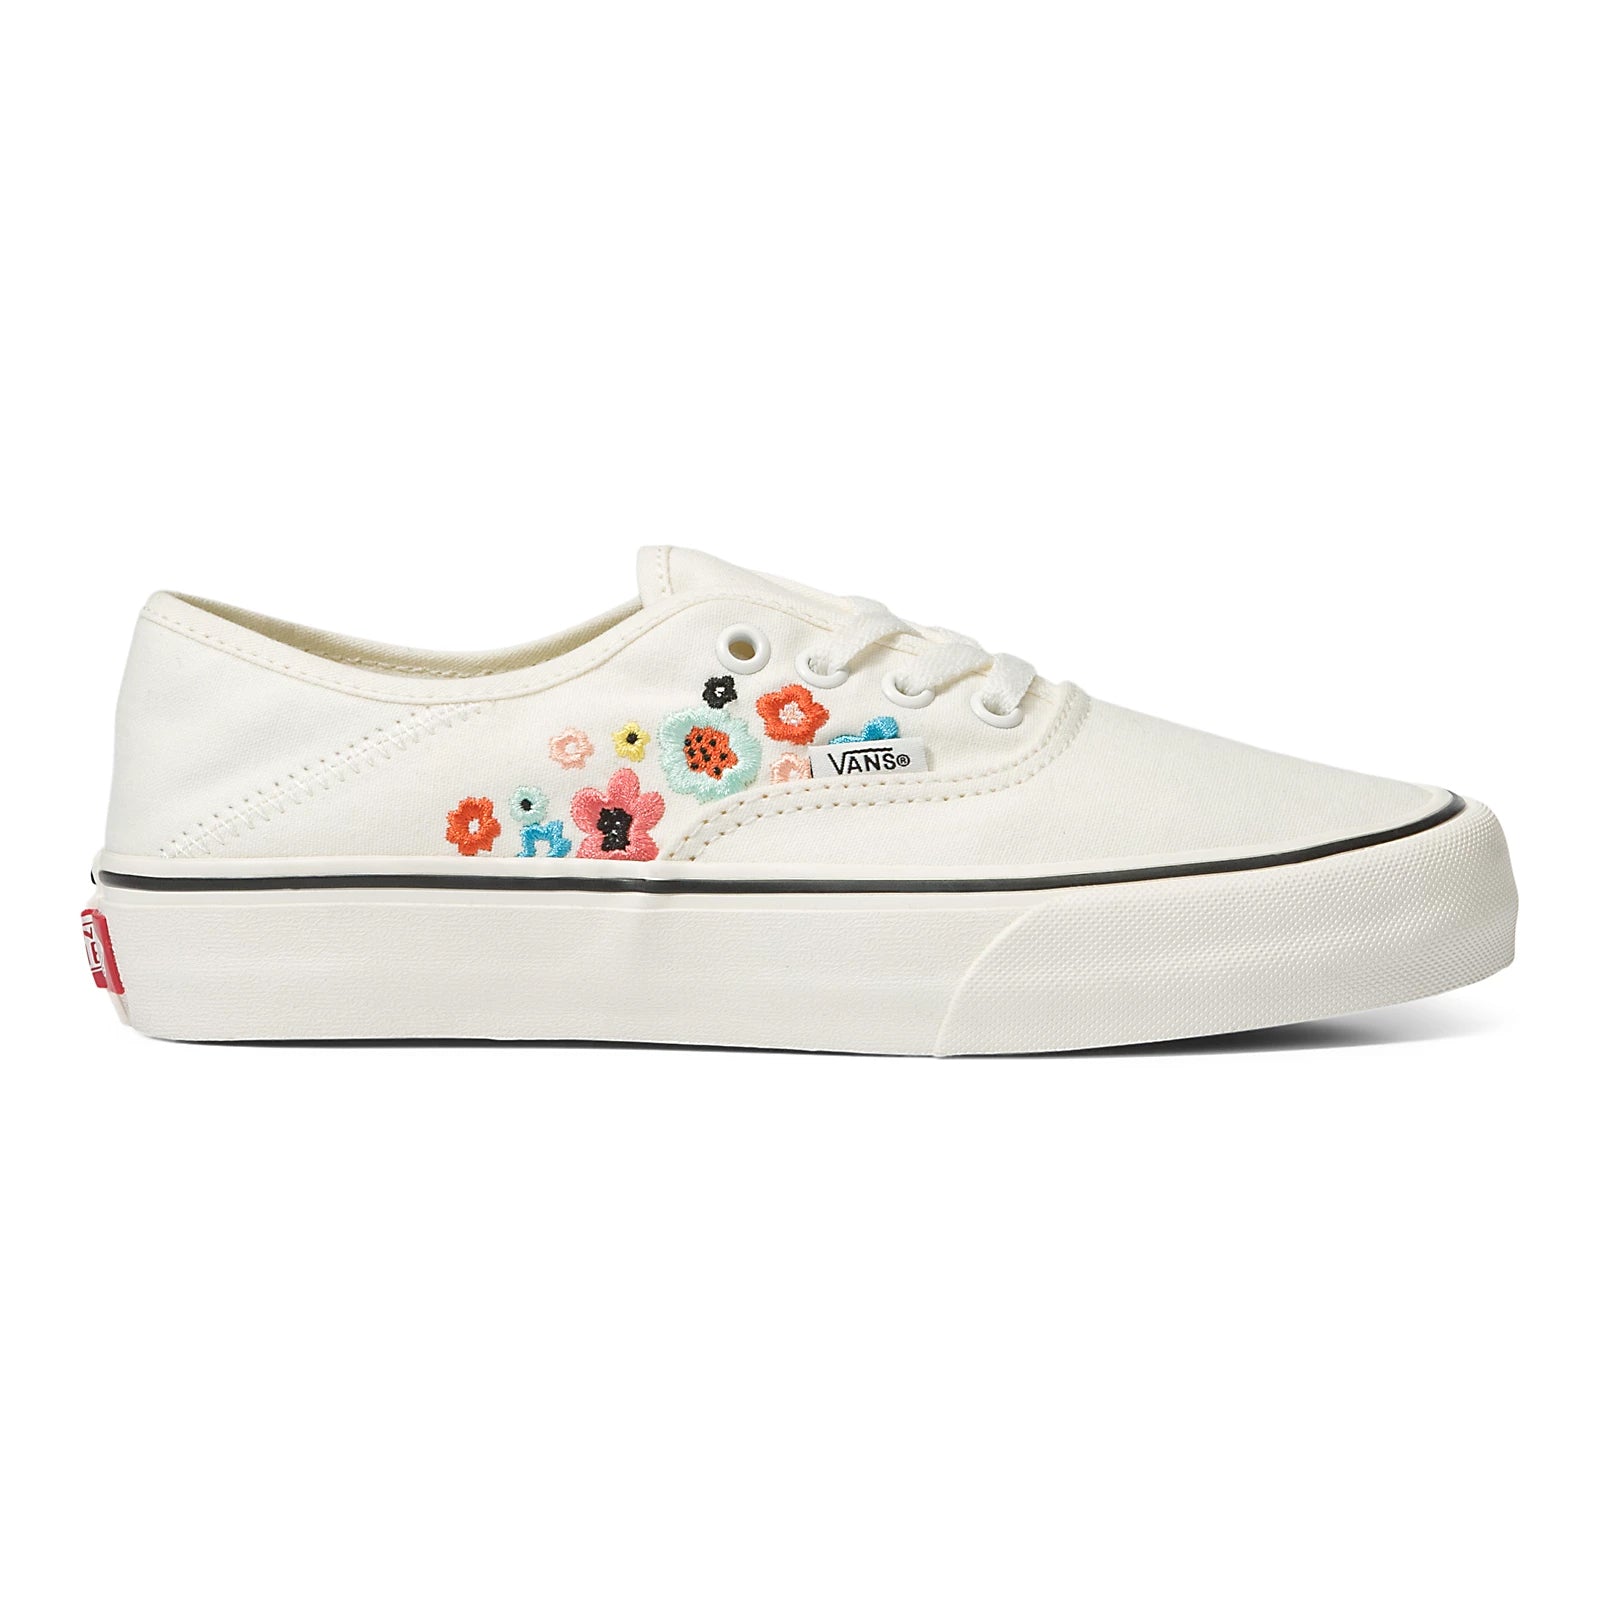 Vans Womens UA Authentic VR3 GroovyFloral/Marshmallow 7.5w